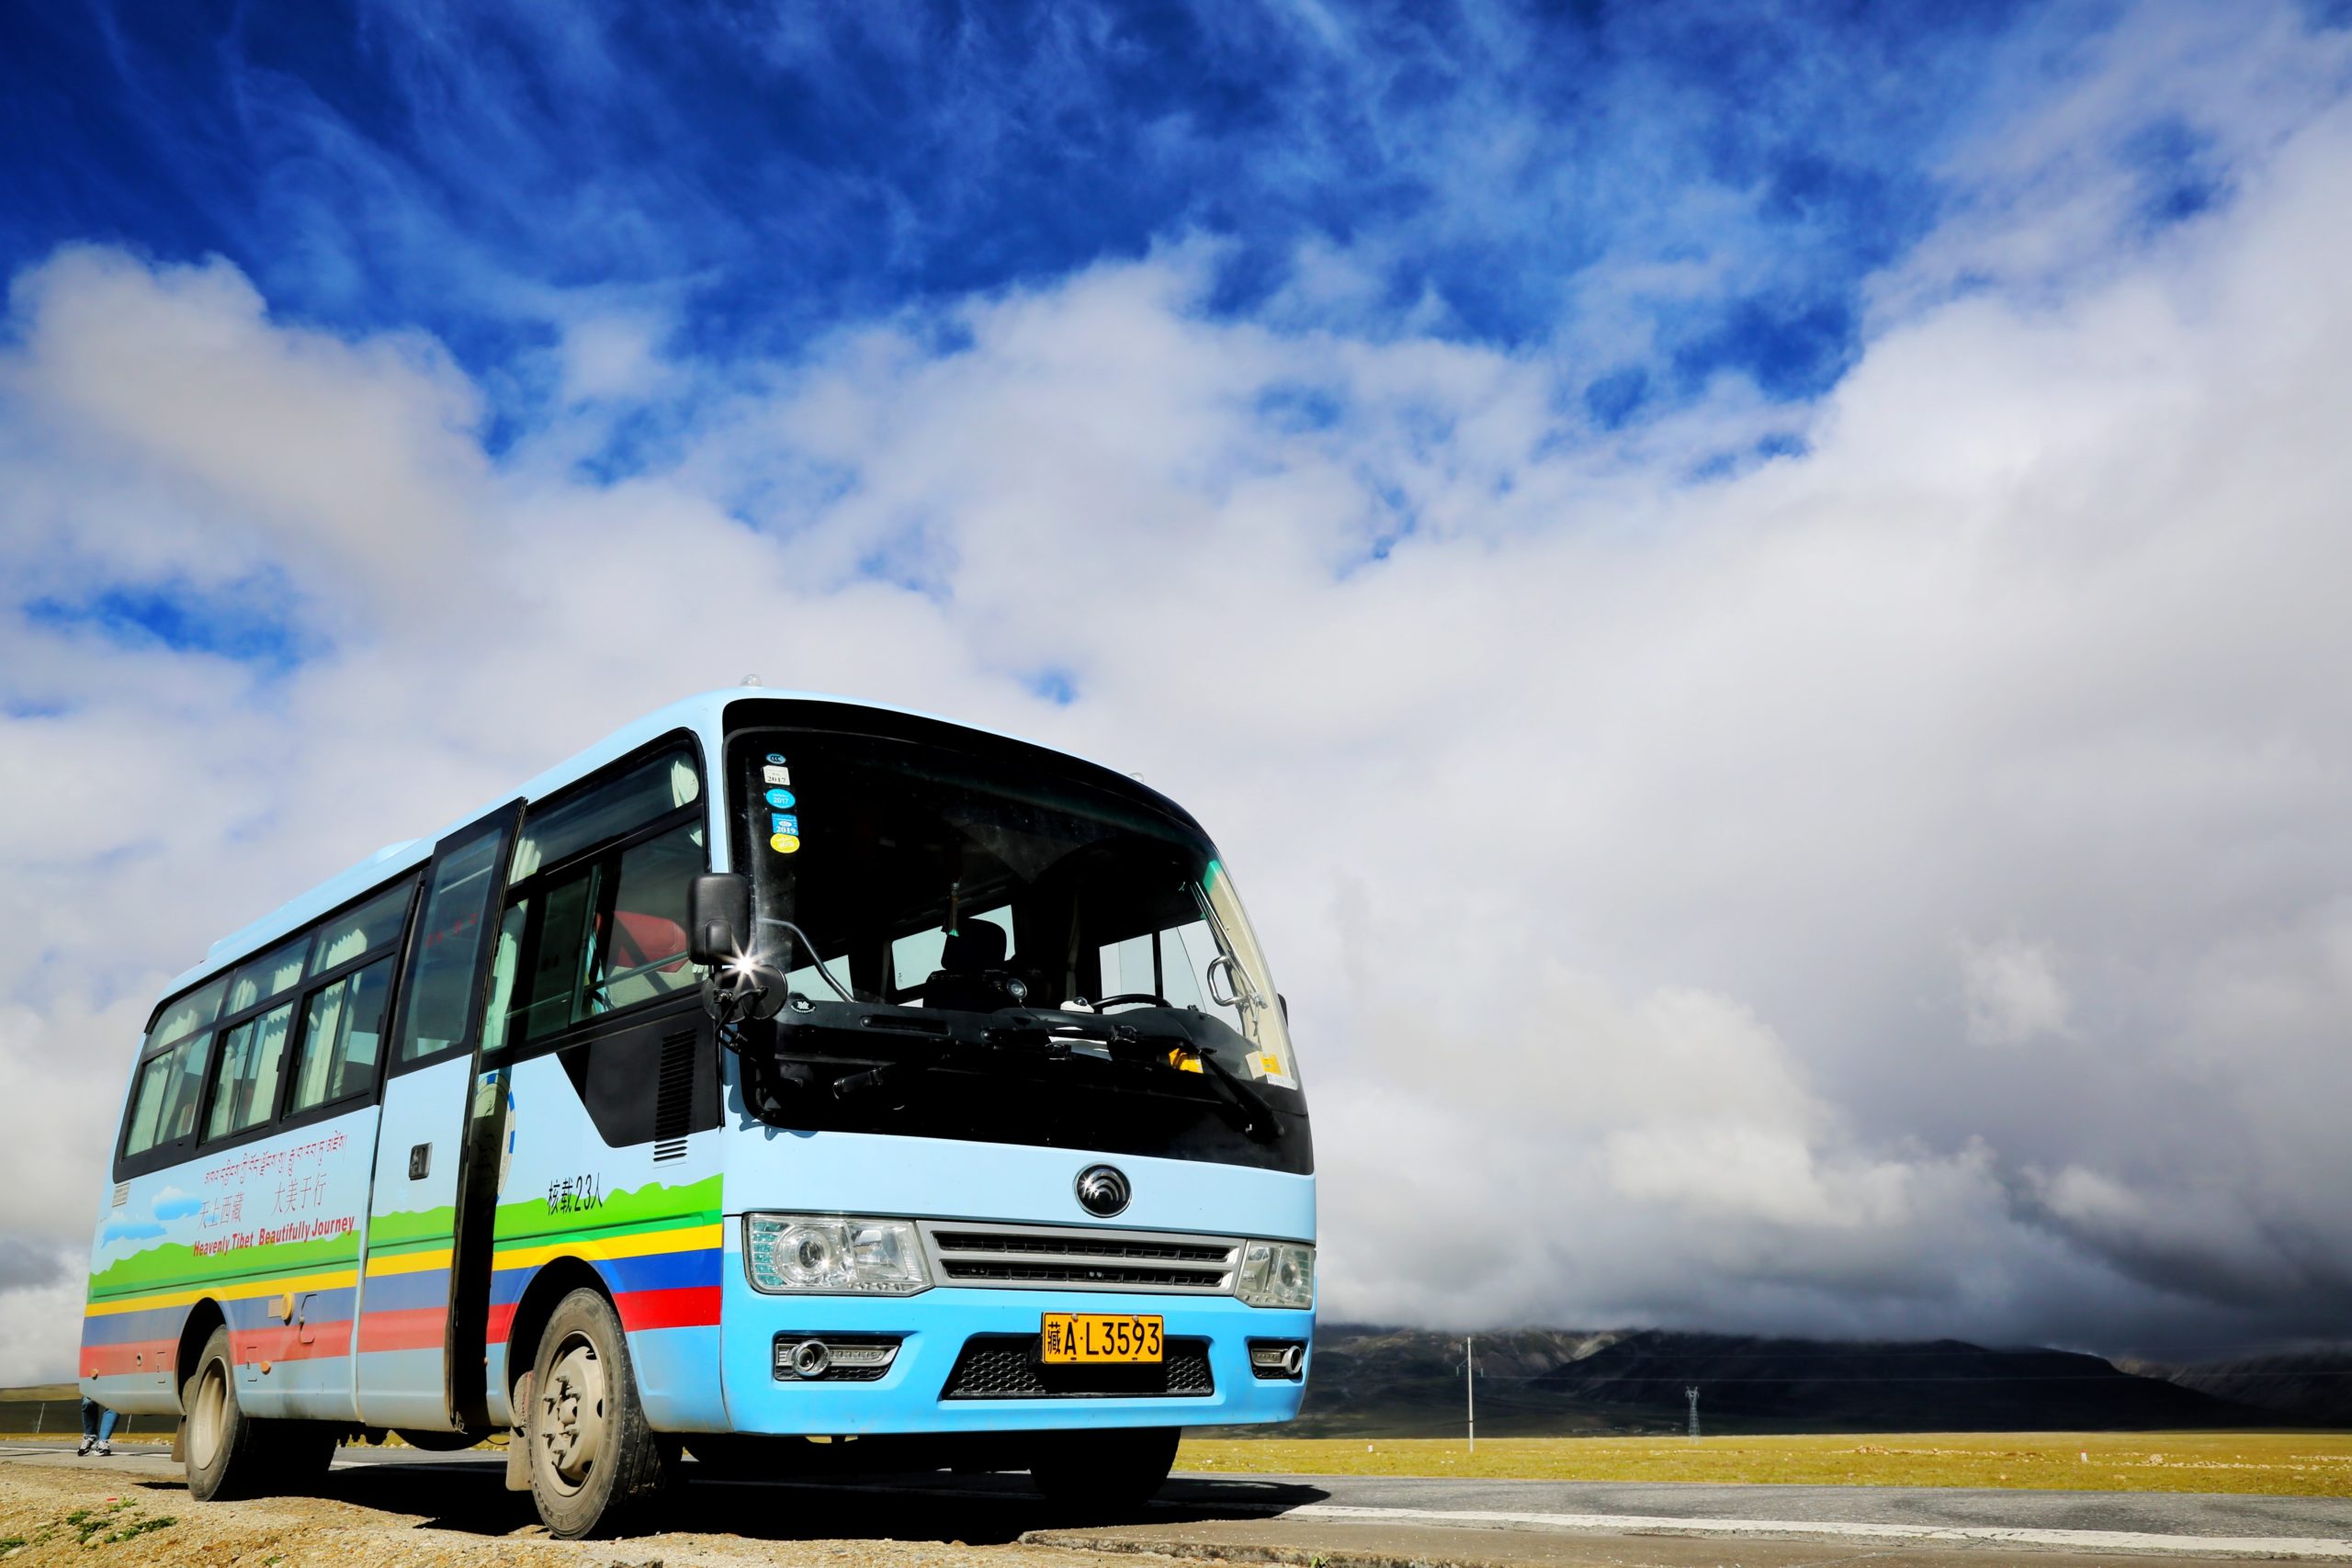 7 questions to check if you have the right people on your (mini)bus